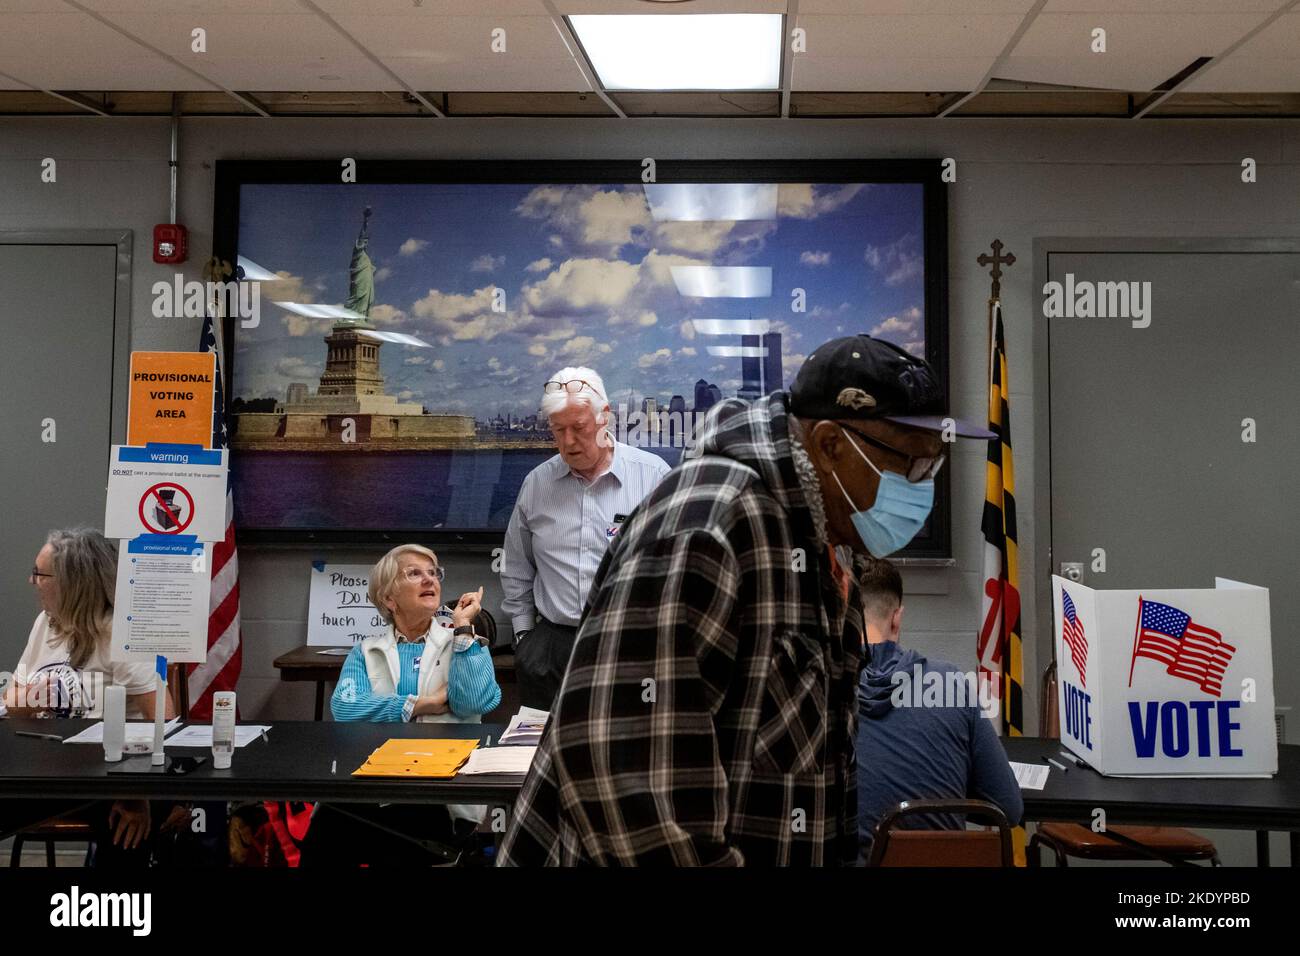 As Americans head to the polls to vote in the 2022 Midterm Elections, voters arrive at the Eastport Volunteer Fire Company in Annapolis, Maryland, Tuesday, November 8, 2022. Credit: Rod Lamkey / CNP /MediaPunch Stock Photo